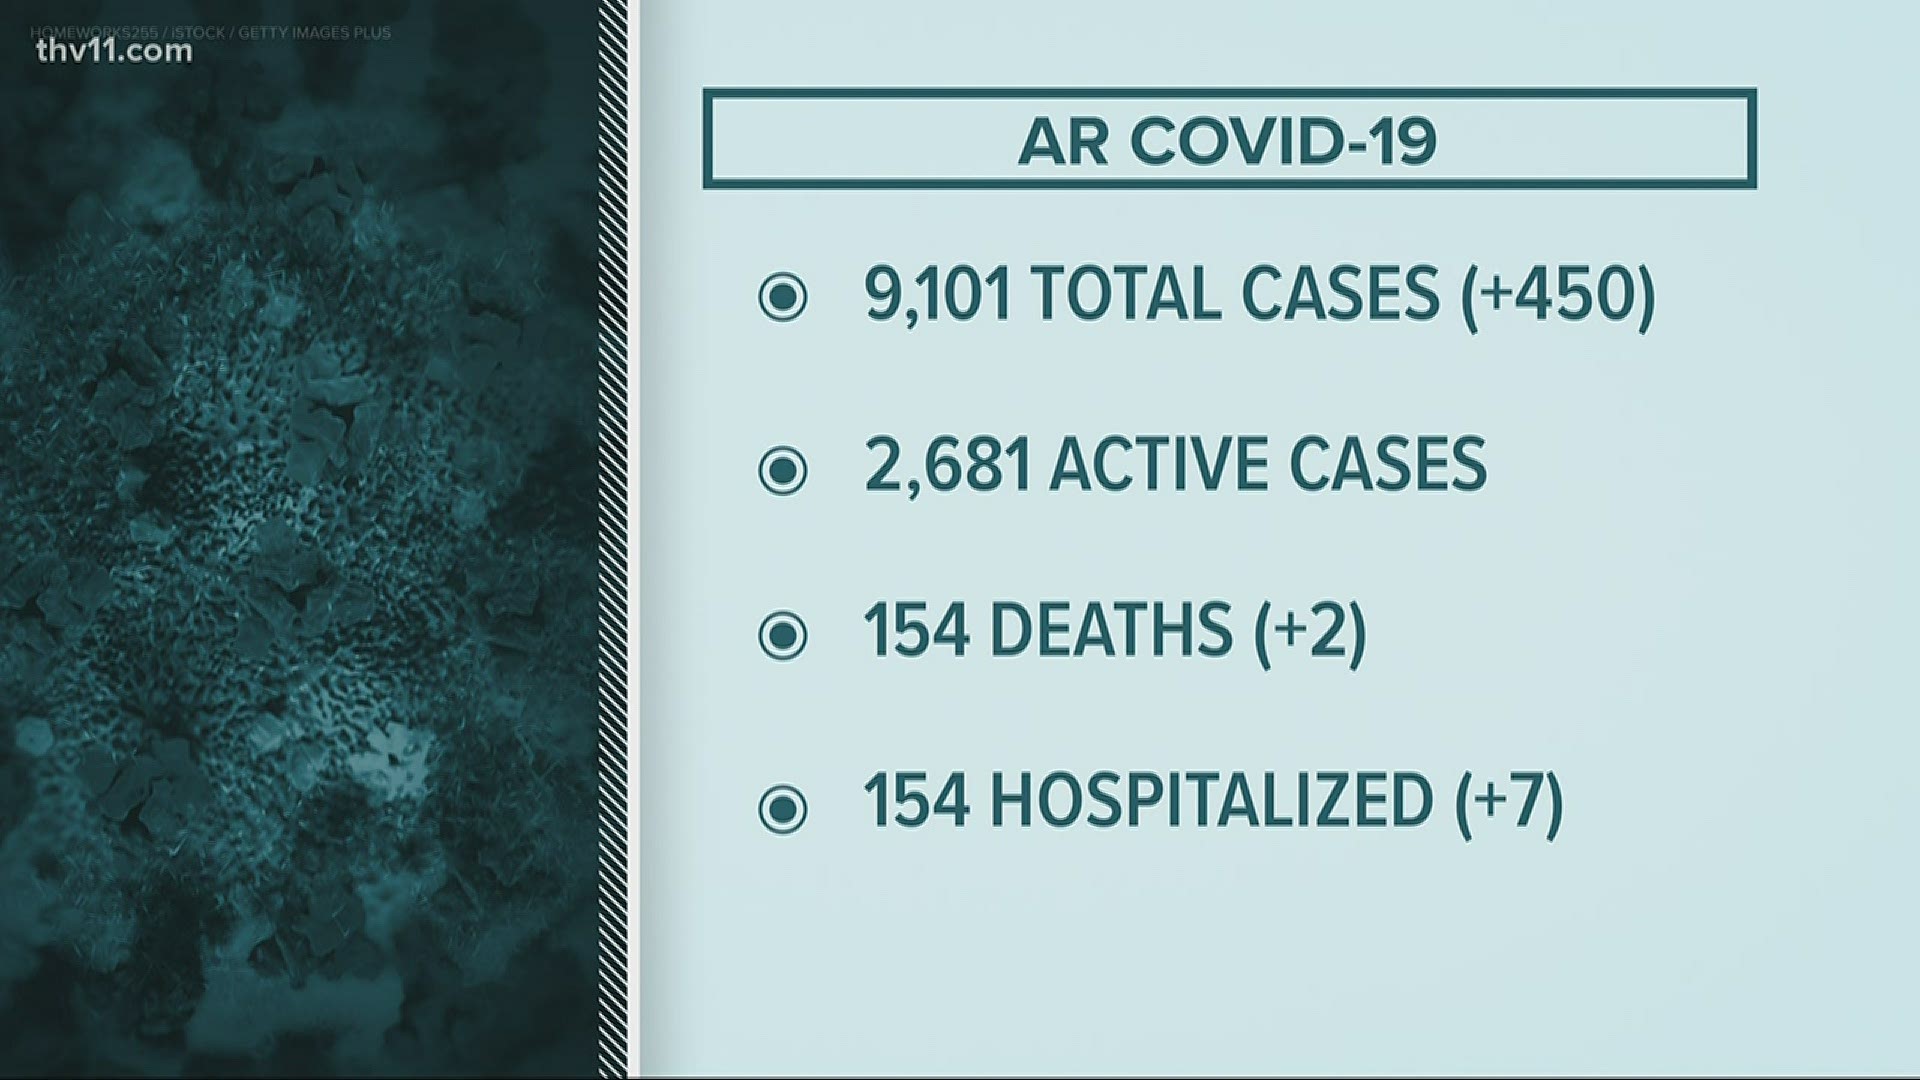 As we track the coronavirus today, we see record-breaking numbers in cases and hospitalizations.